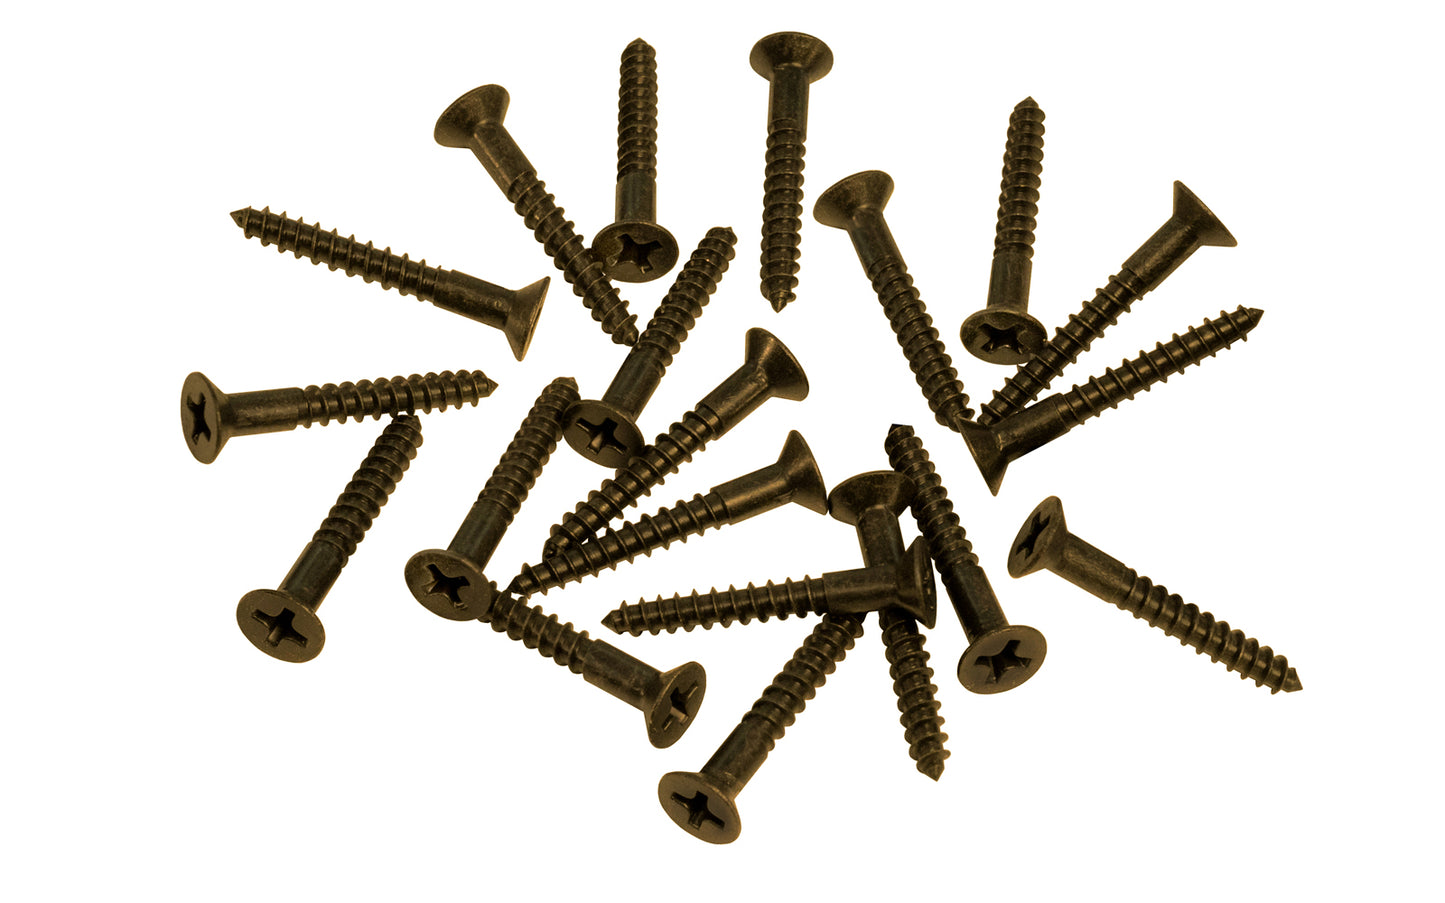 Solid Brass #7 x 1" Flat Head Phillips Wood Screws. Traditional & classic vintage-style countersunk wood screws. Sold as 20 screws in bag. Antique Brass Finish.